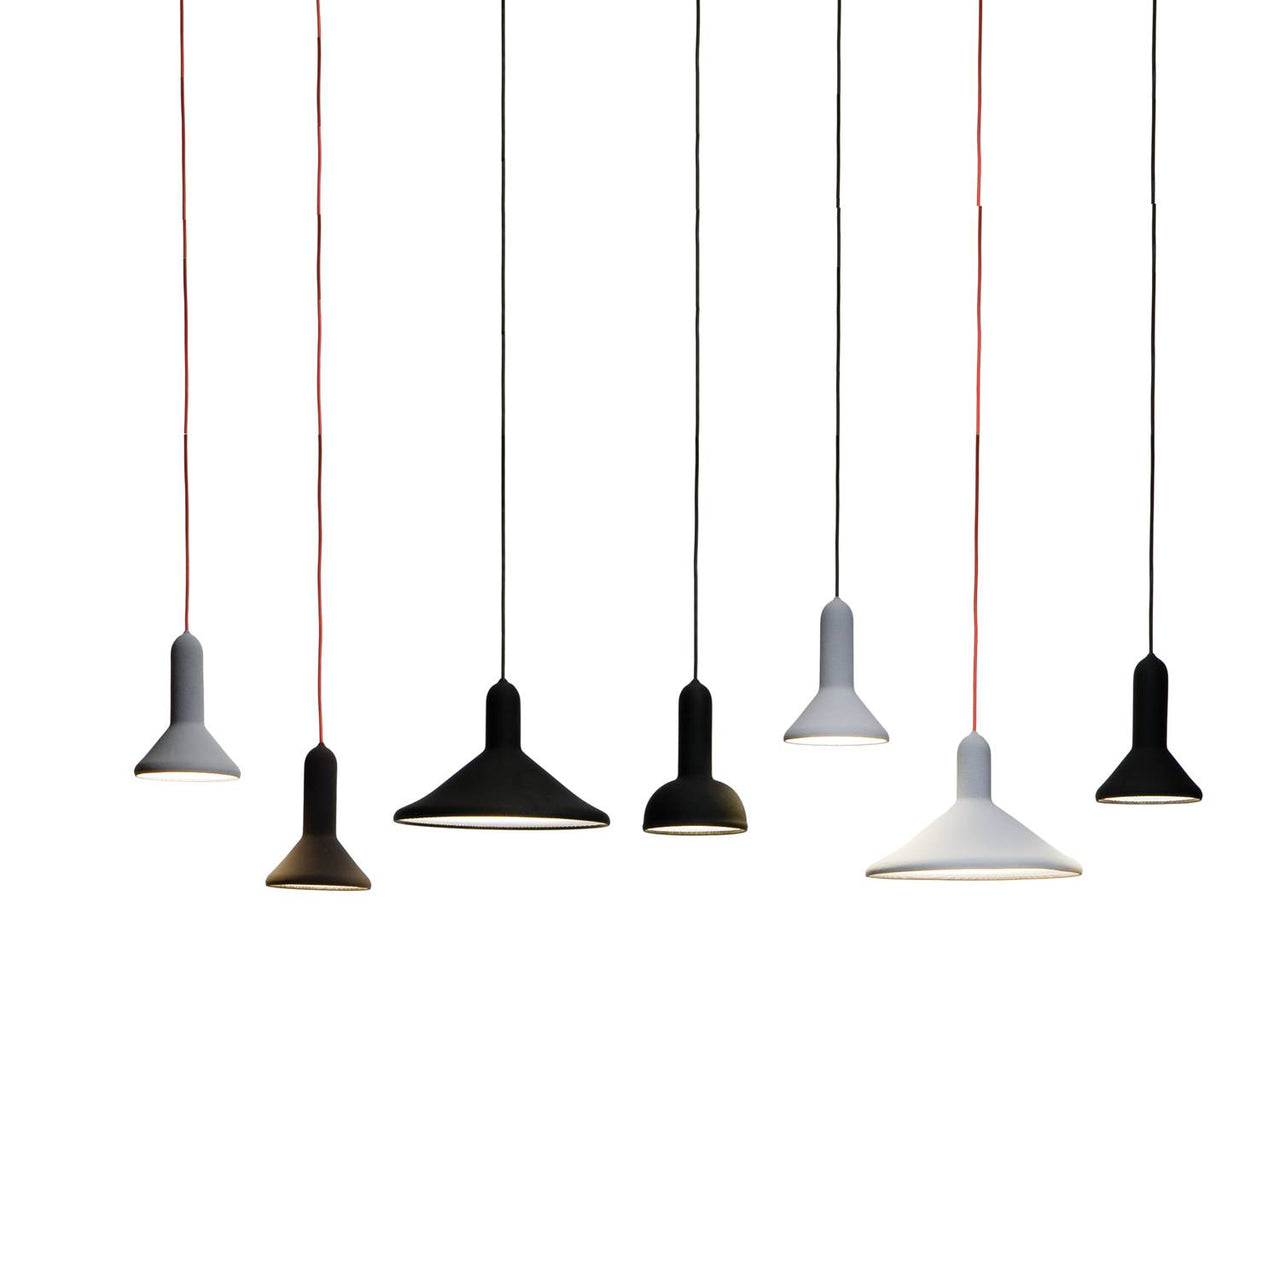 Torch Light Pendant: S1 Cone + Signal Grey + Red + S1 Cone + Black + Black + S3 Cone + Black + Black + S2 Round + Black + Black + S1 Cone + Grey + Black + S3 Cone + Grey + Red + S Cone + Black + Black